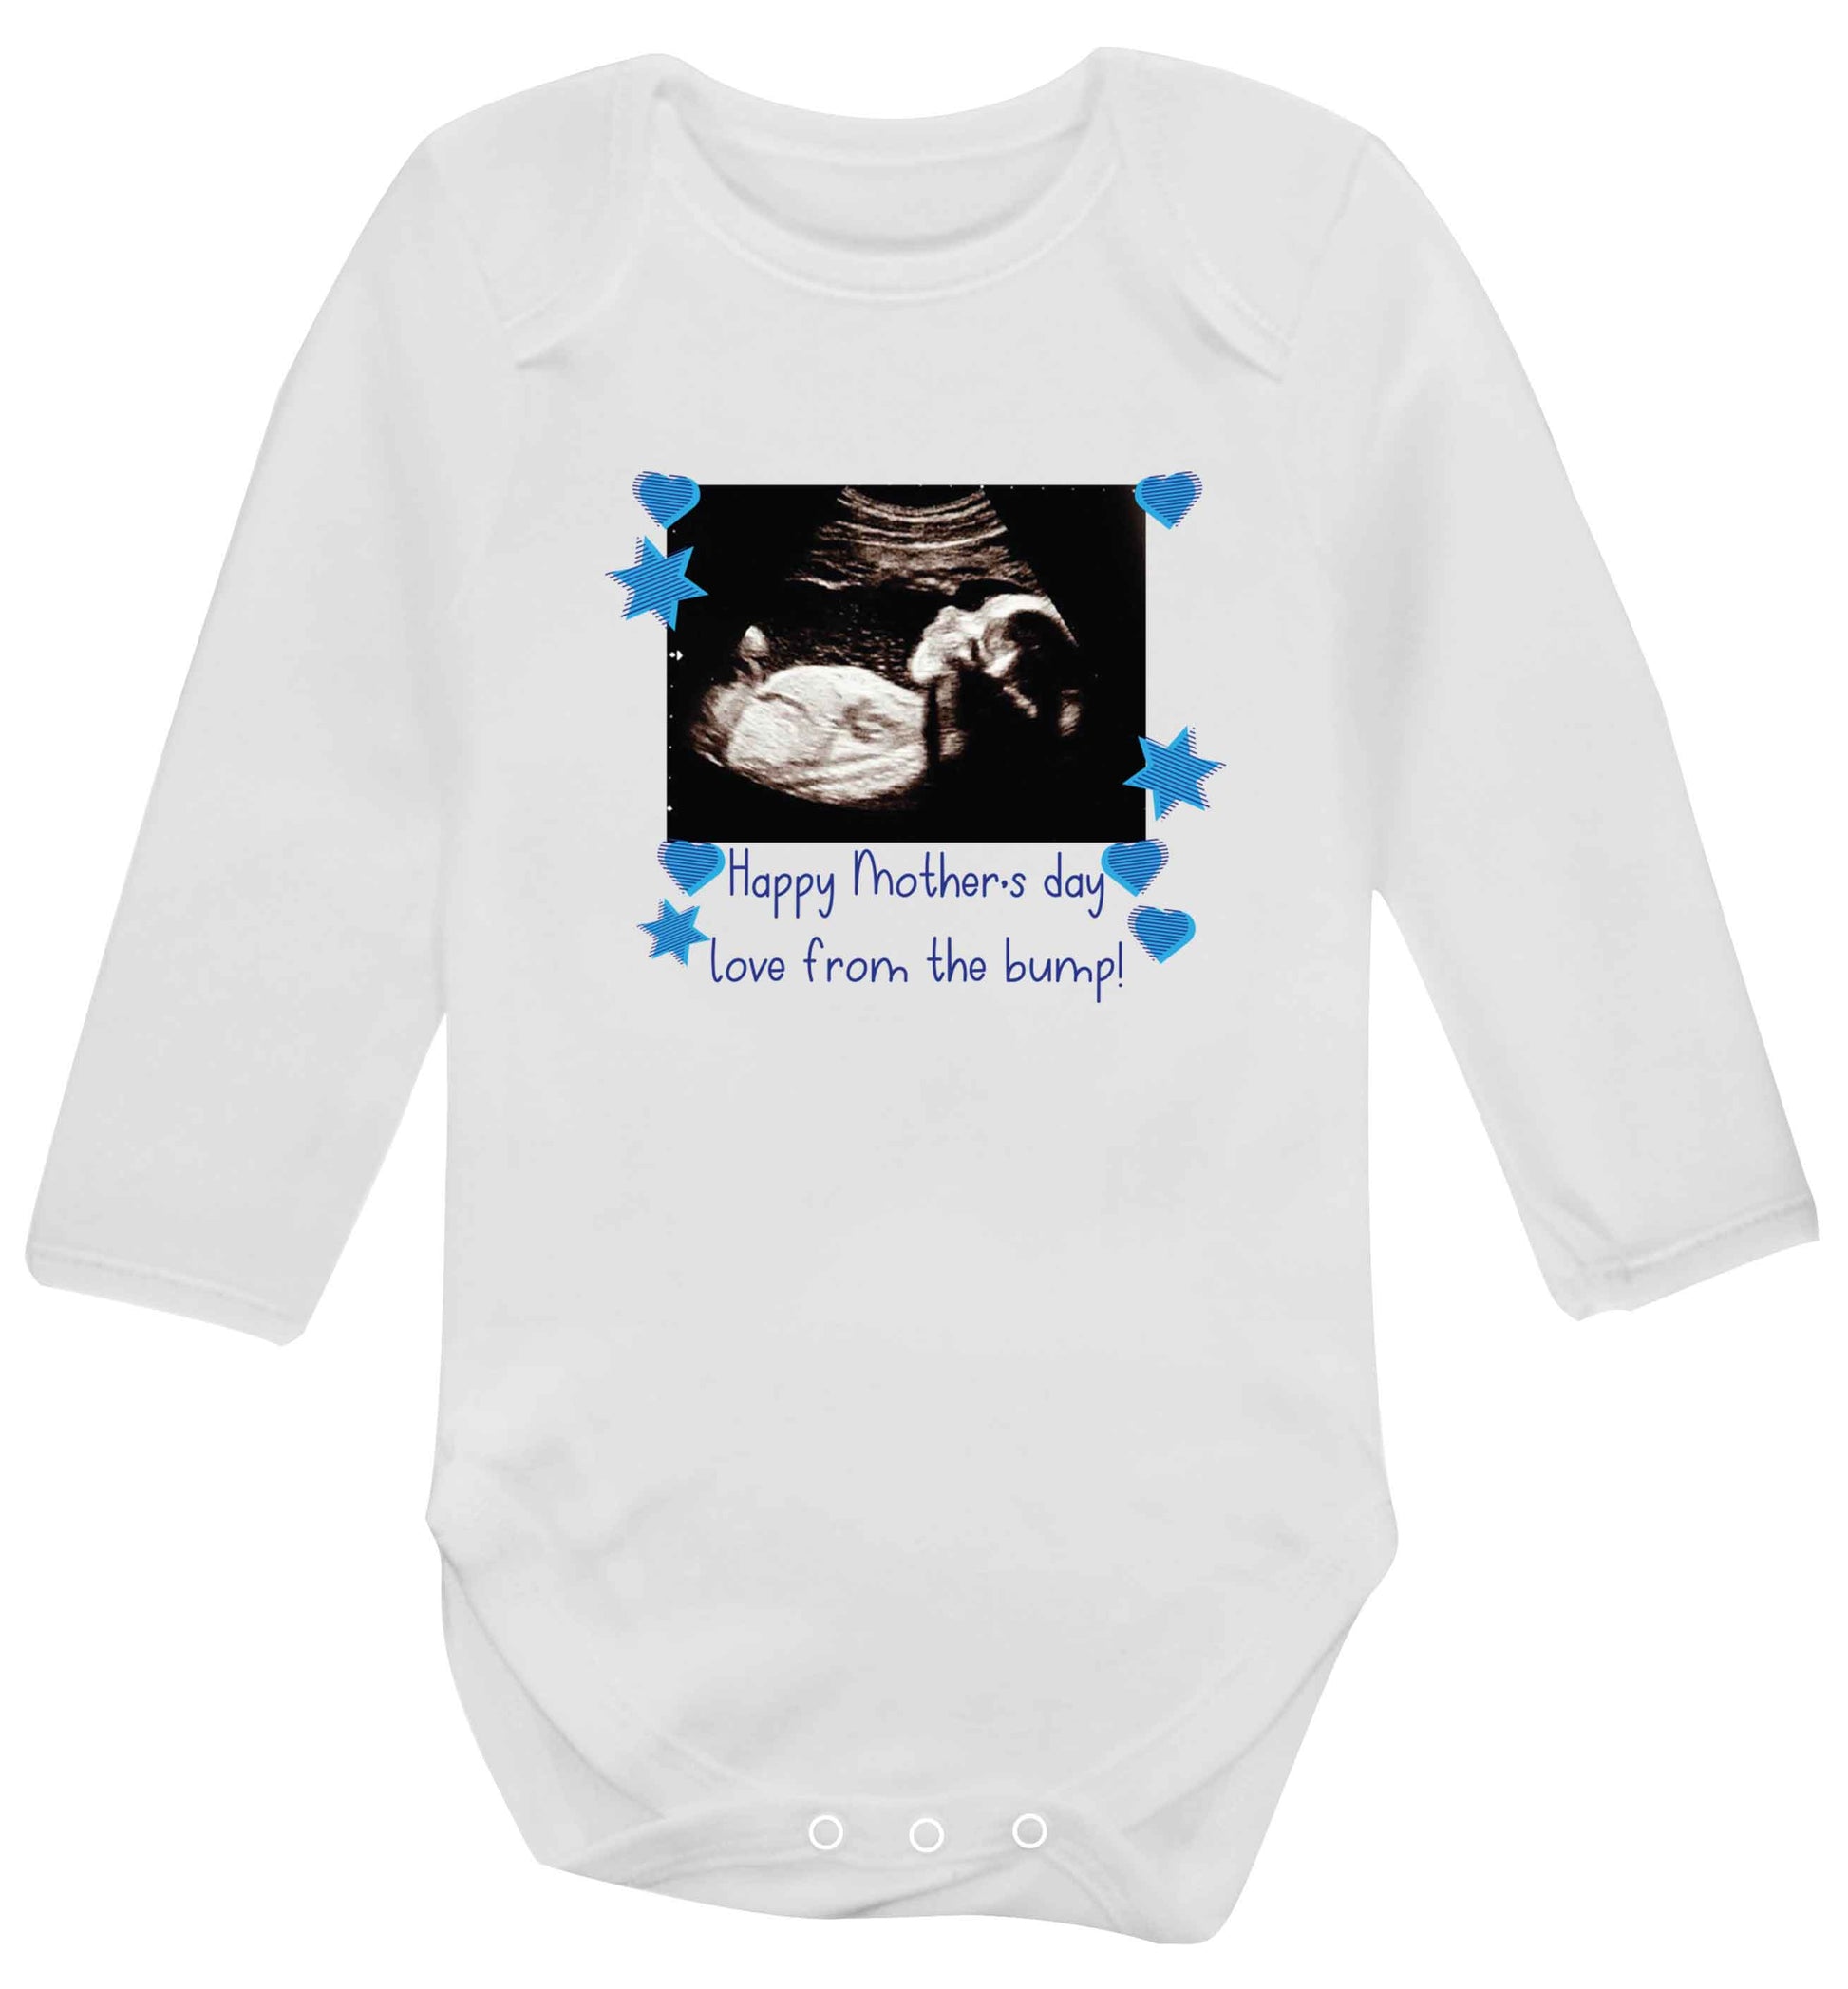 Happy Mother's day love from the bump - blue baby vest long sleeved white 6-12 months